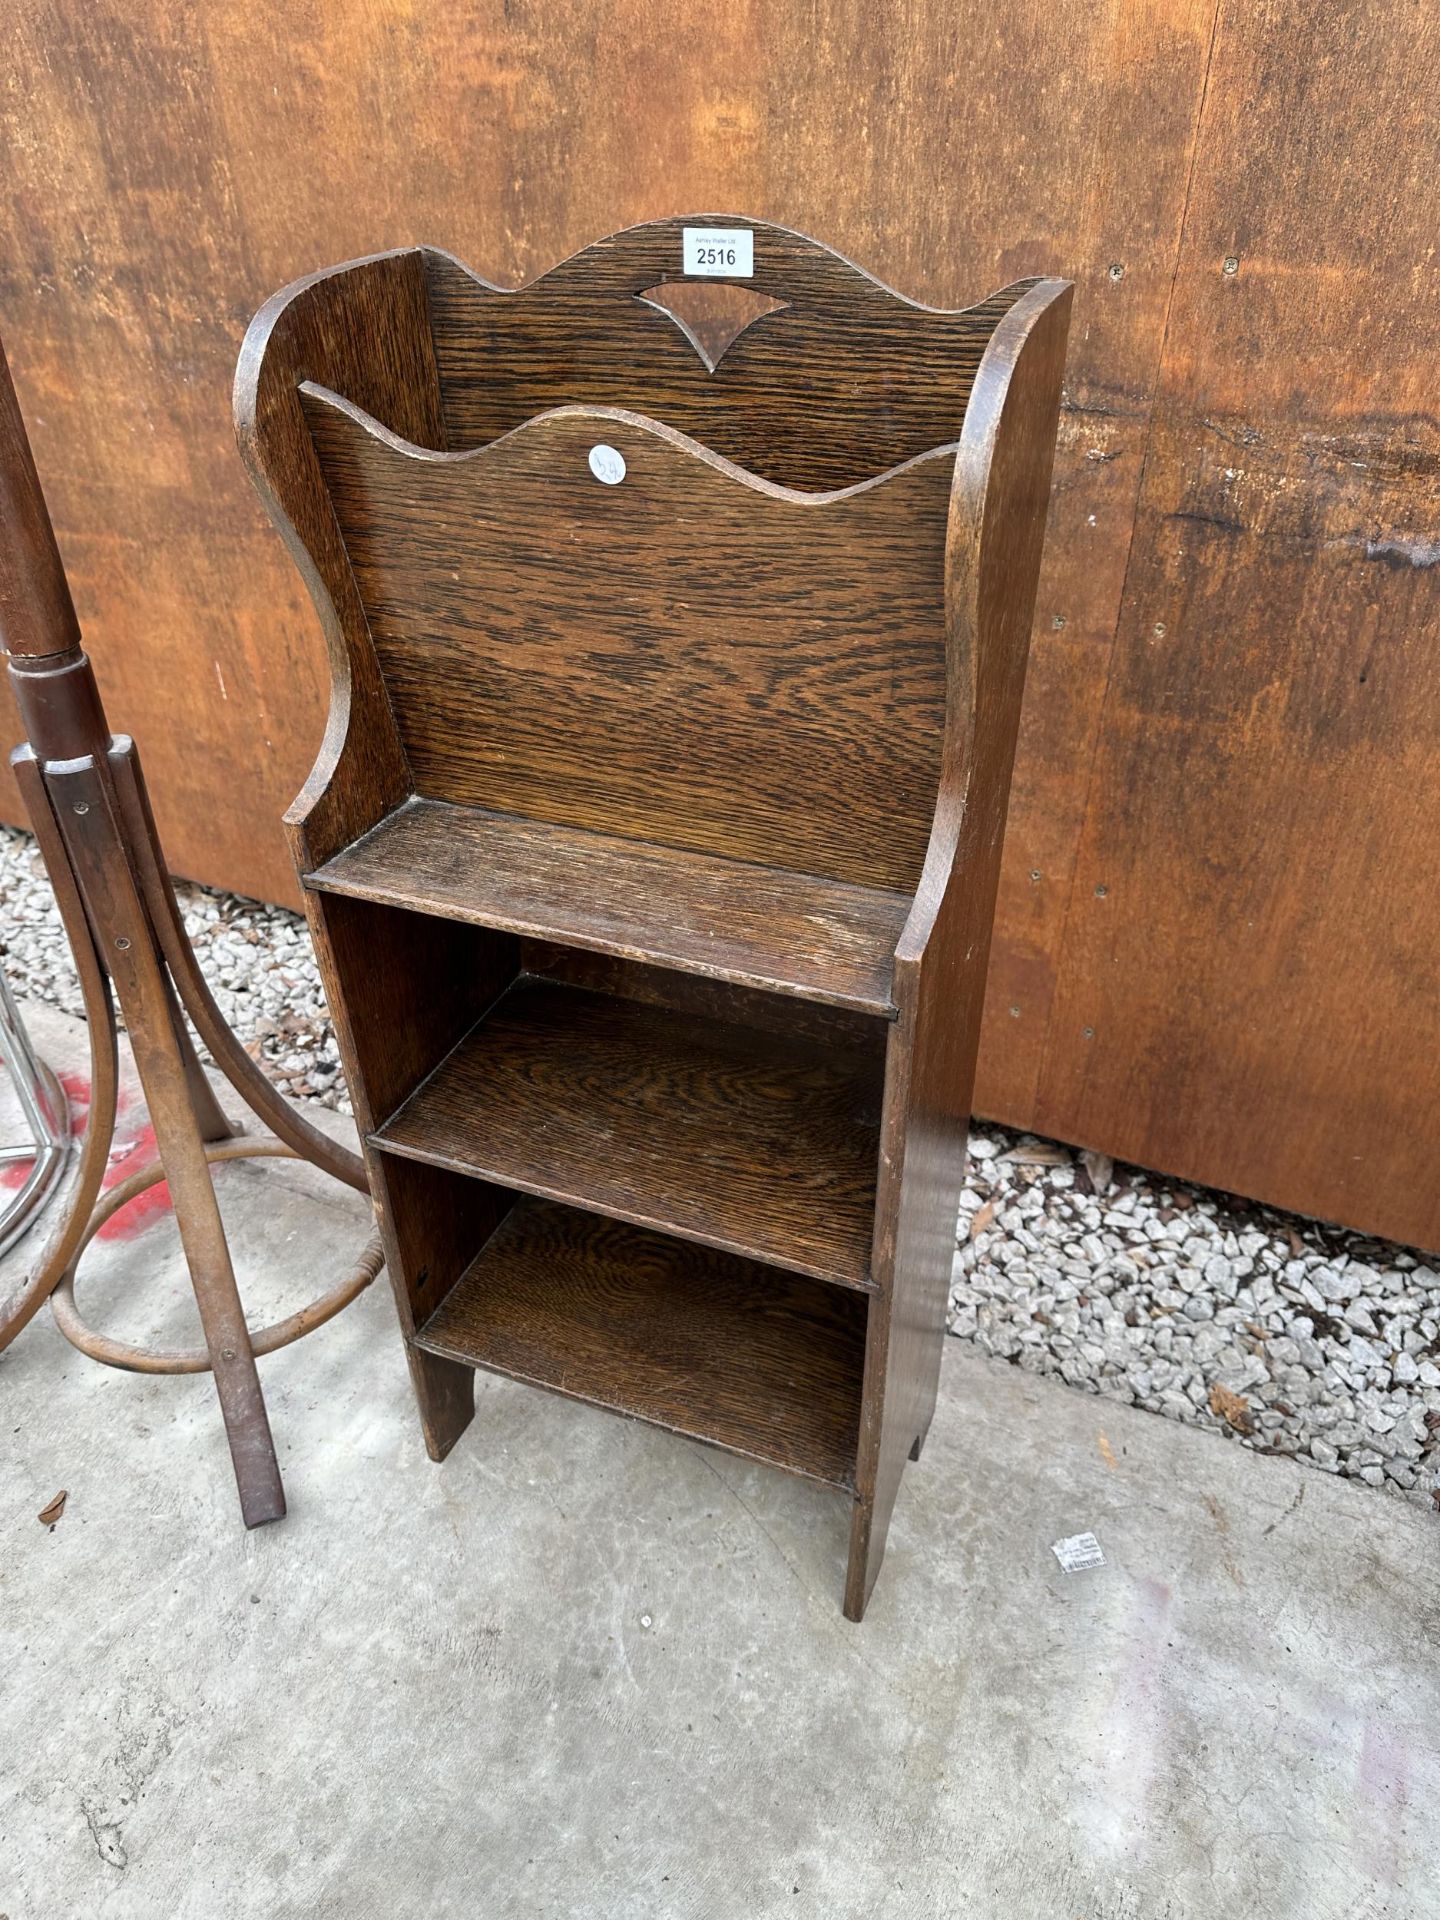 A MED 20TH CENTURY OAK OPEN BOOKCASE/ MAGAZINE STAND - 15" WIDE